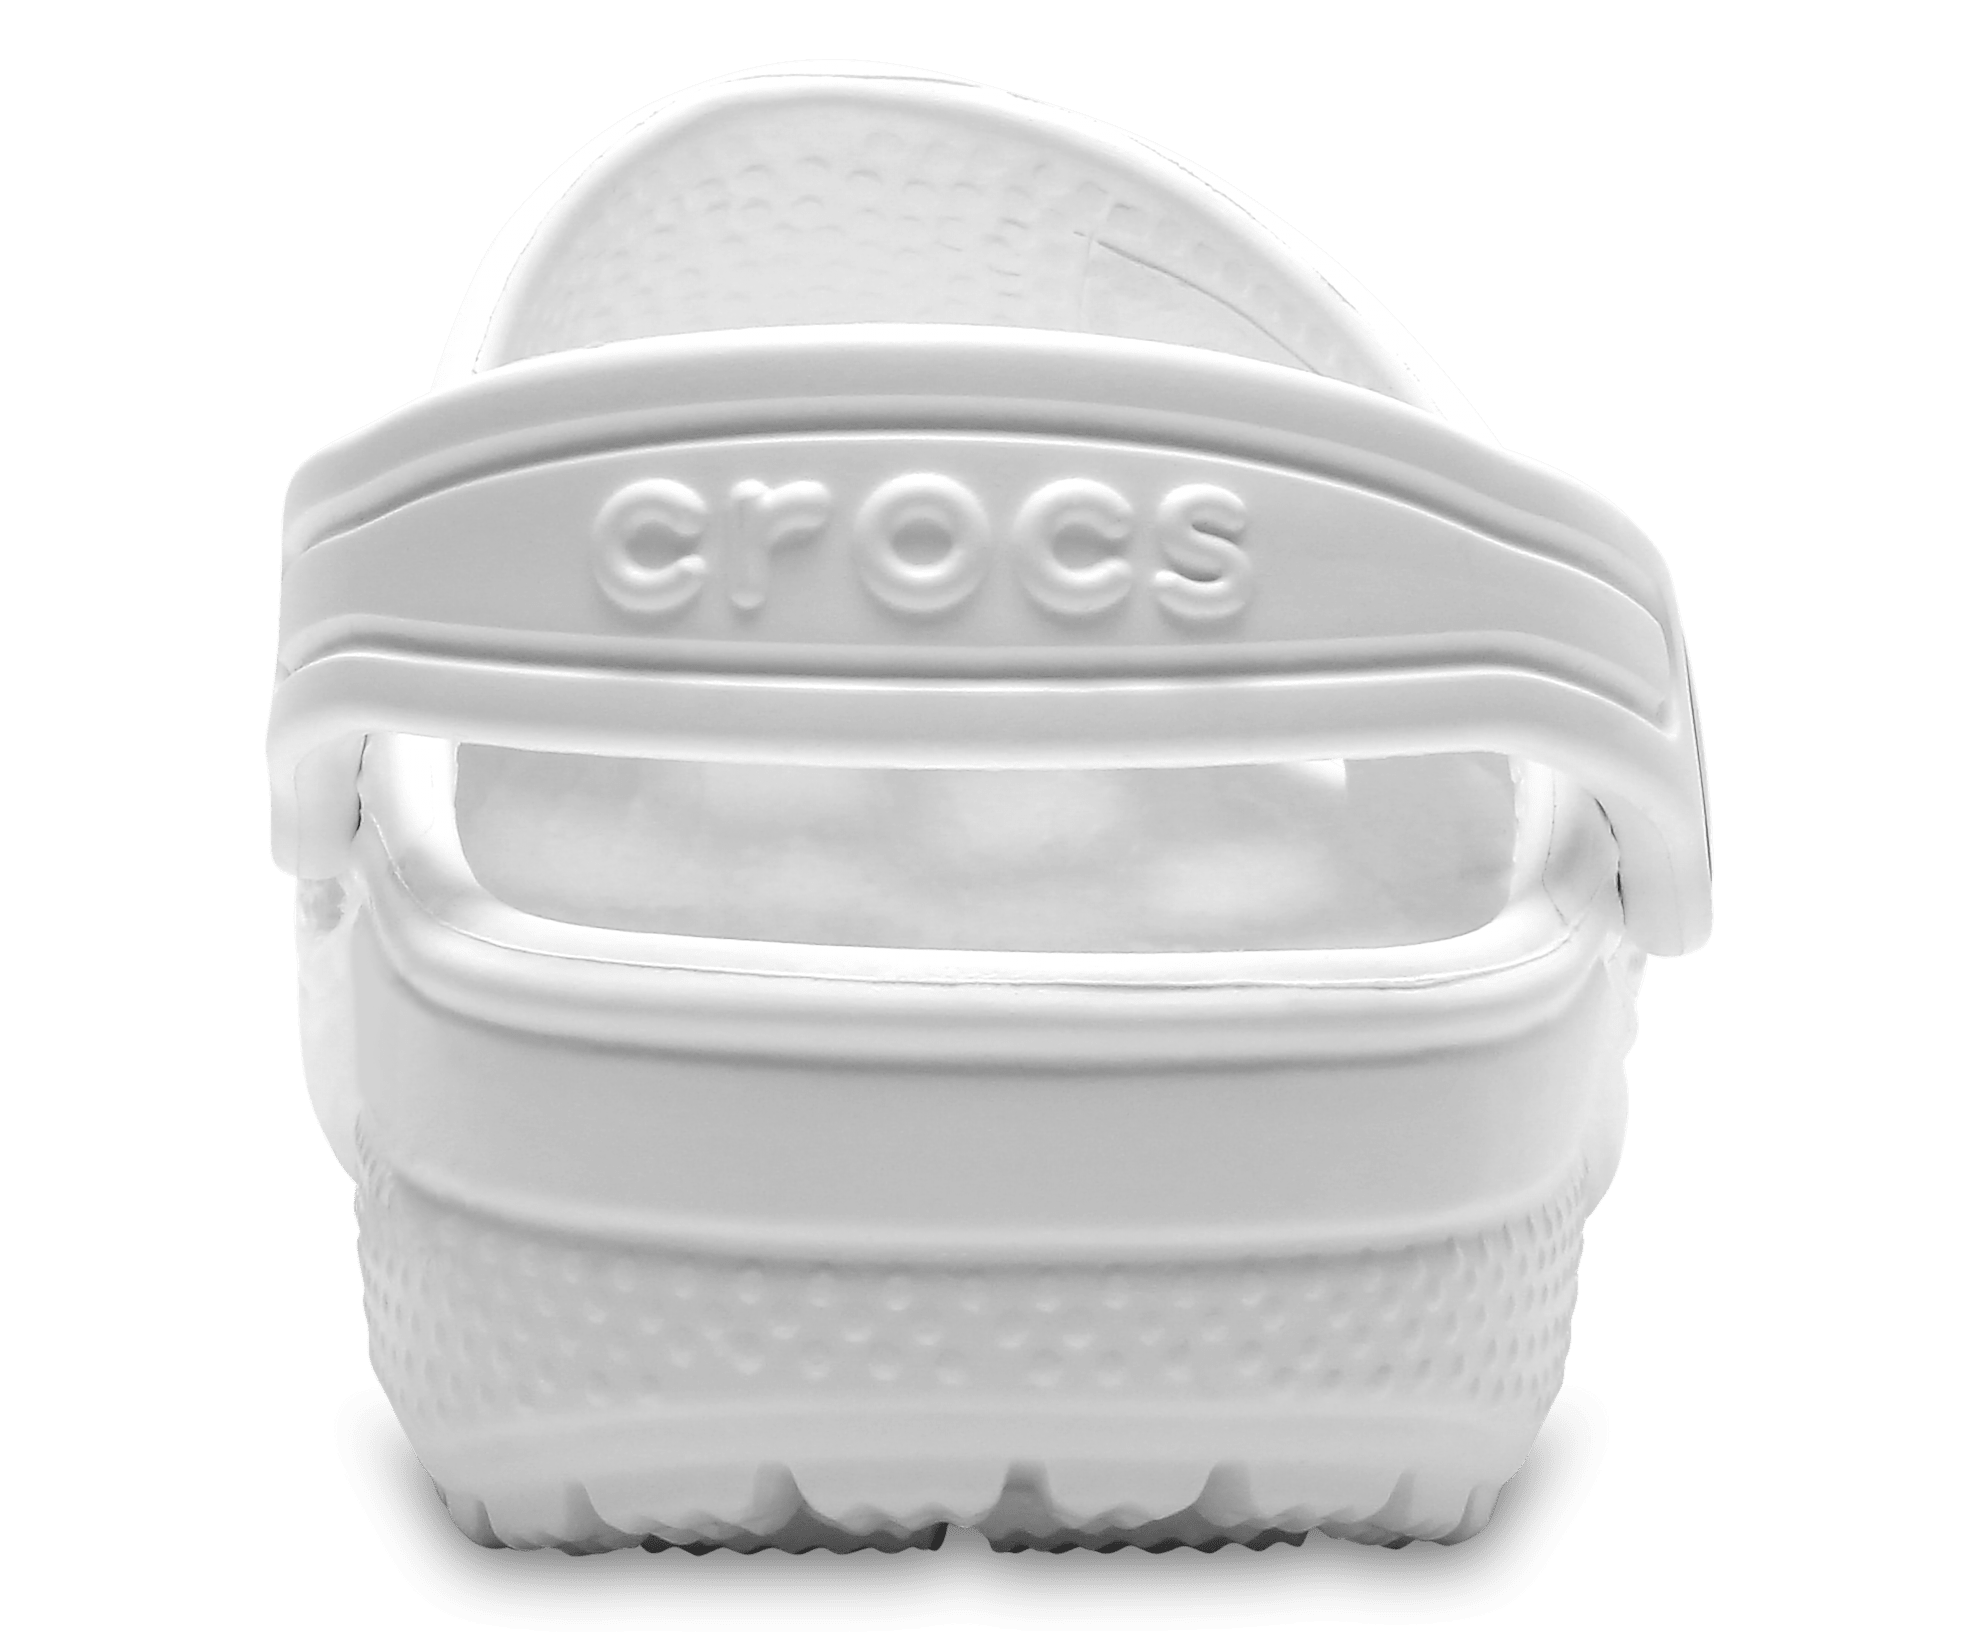 Crocs Kids Classic Clog - White - The Foot Factory